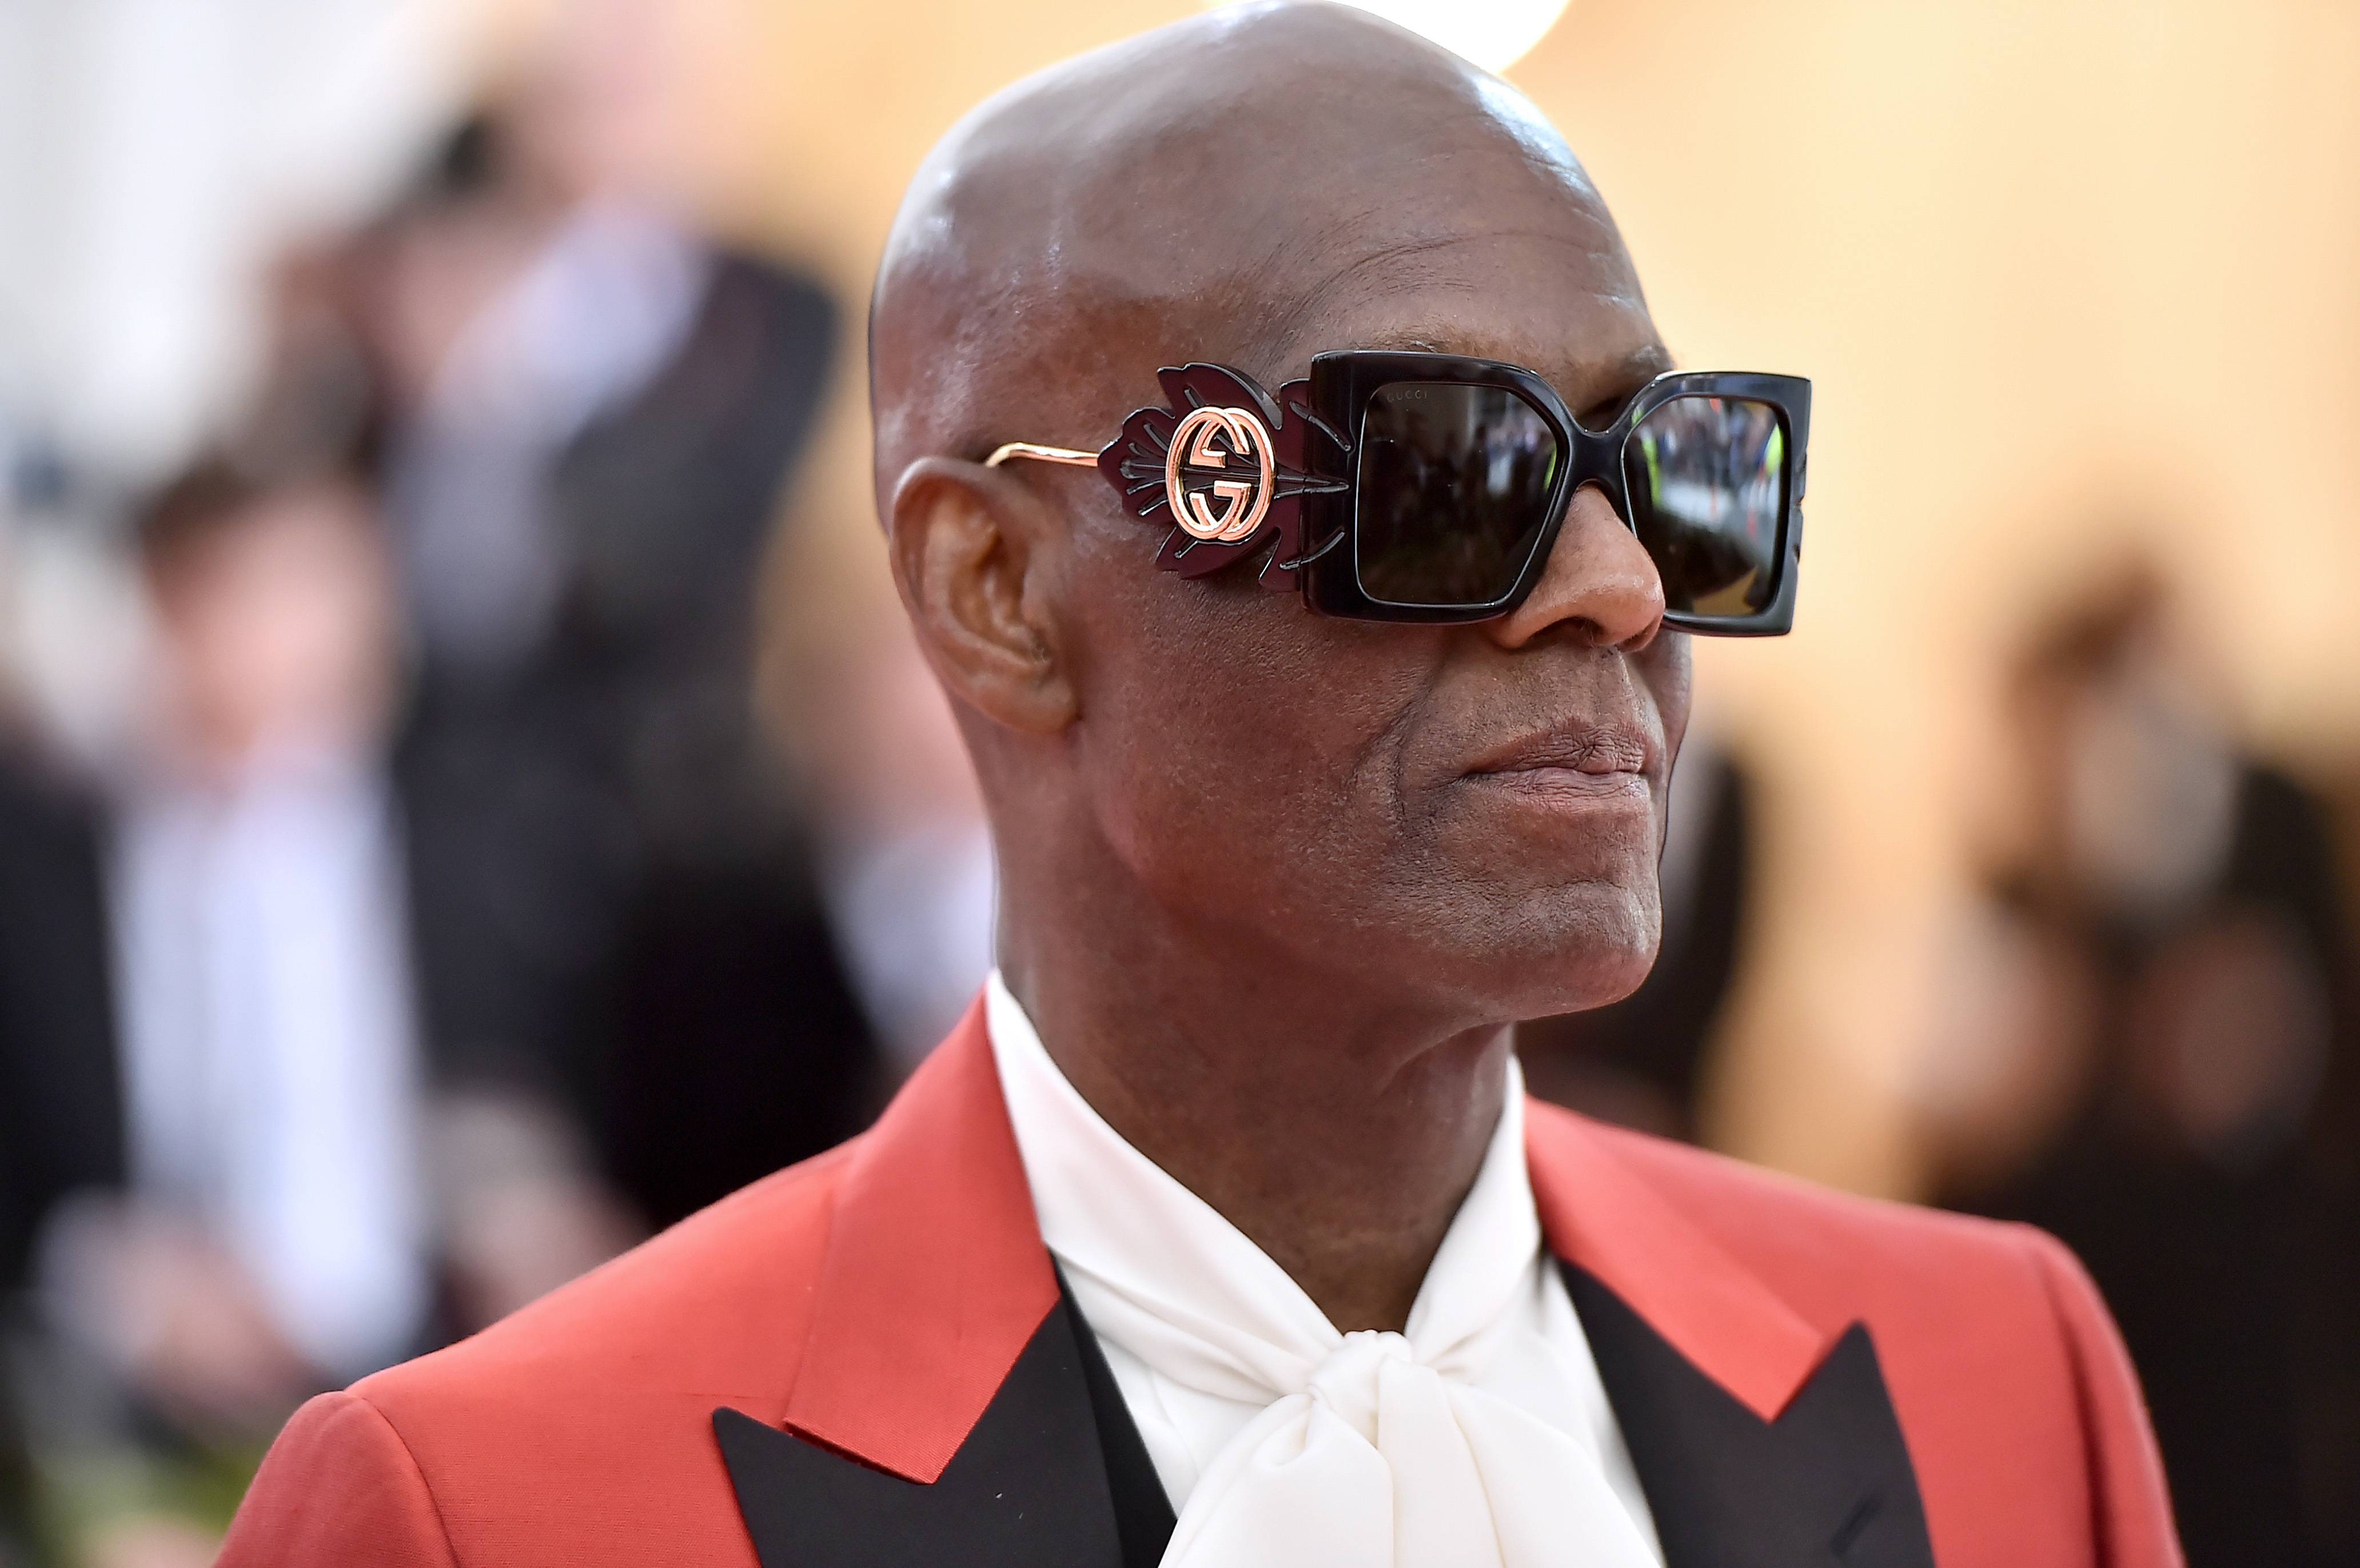 NEW YORK, NEW YORK - MAY 06: Dapper Dan attends The 2019 Met Gala Celebrating Camp: Notes on Fashion at Metropolitan Museum of Art on May 06, 2019 in New York City. (Photo by Theo Wargo/WireImage)